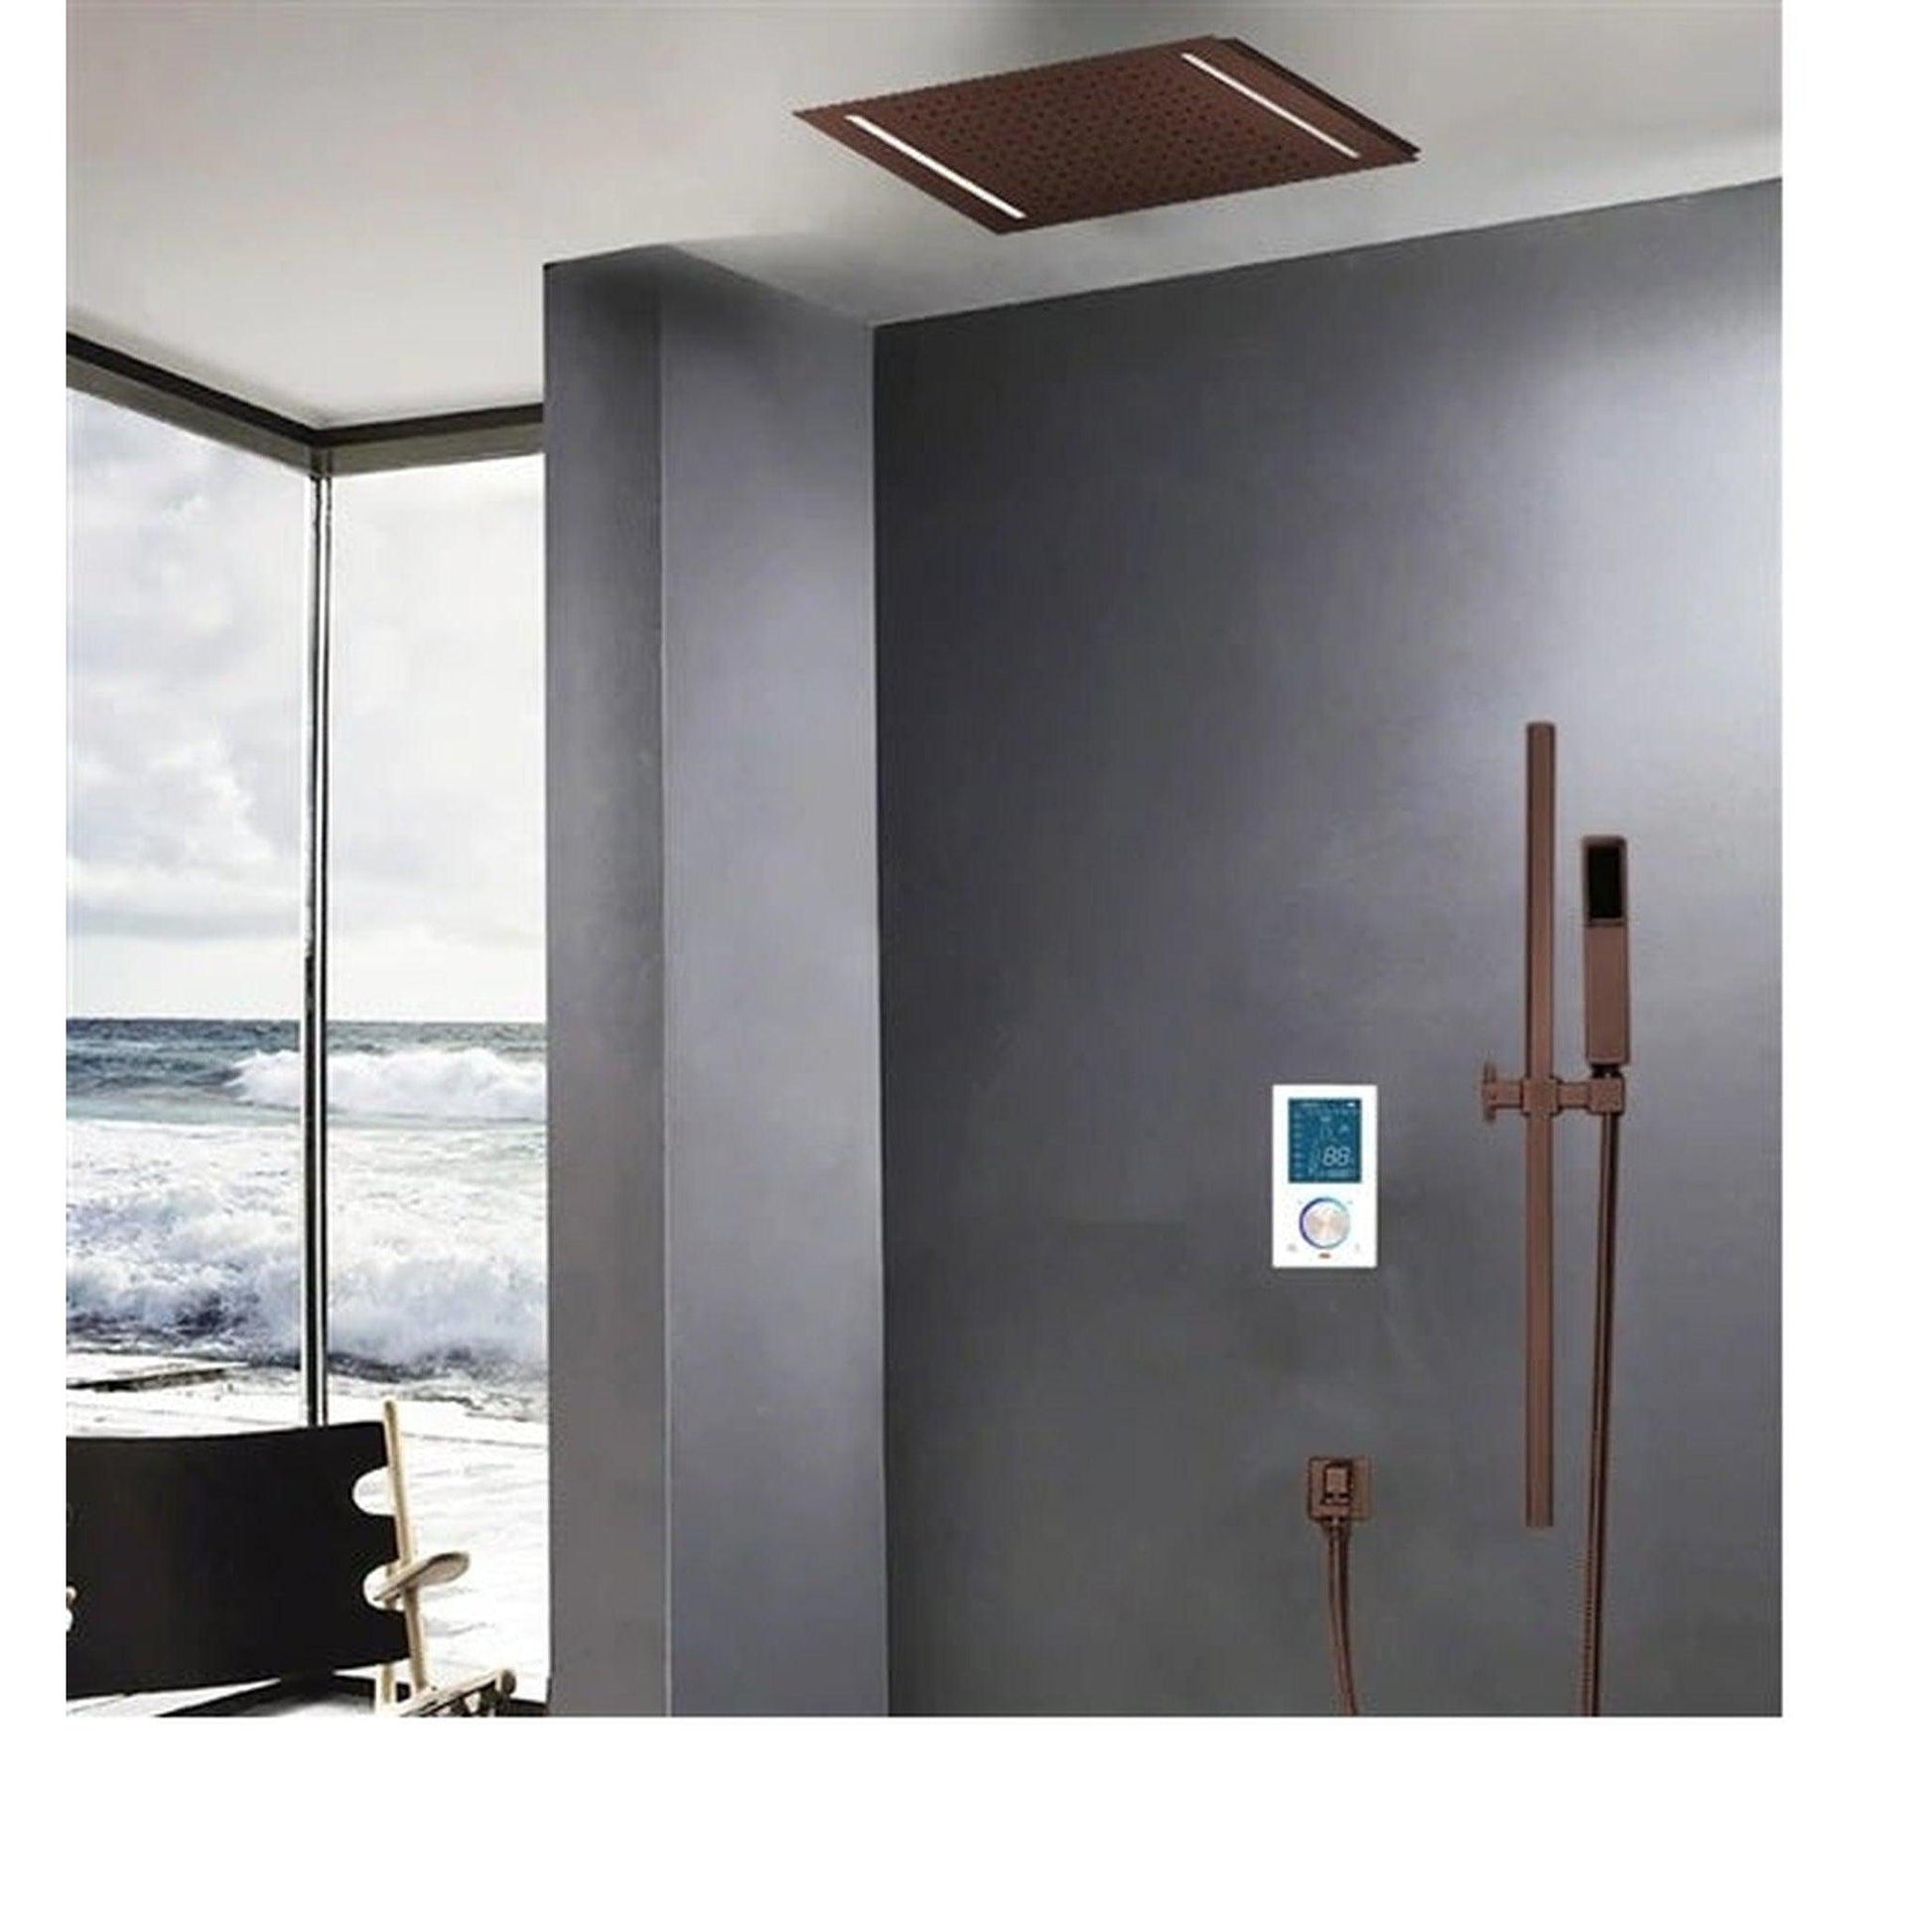 FontanaShowers Creative Luxury Light Oil Rubbed Bronze Rectangular Ceiling Mounted Rainfall Shower System With Smart & Intelligent LED Touch Control and Hand Shower